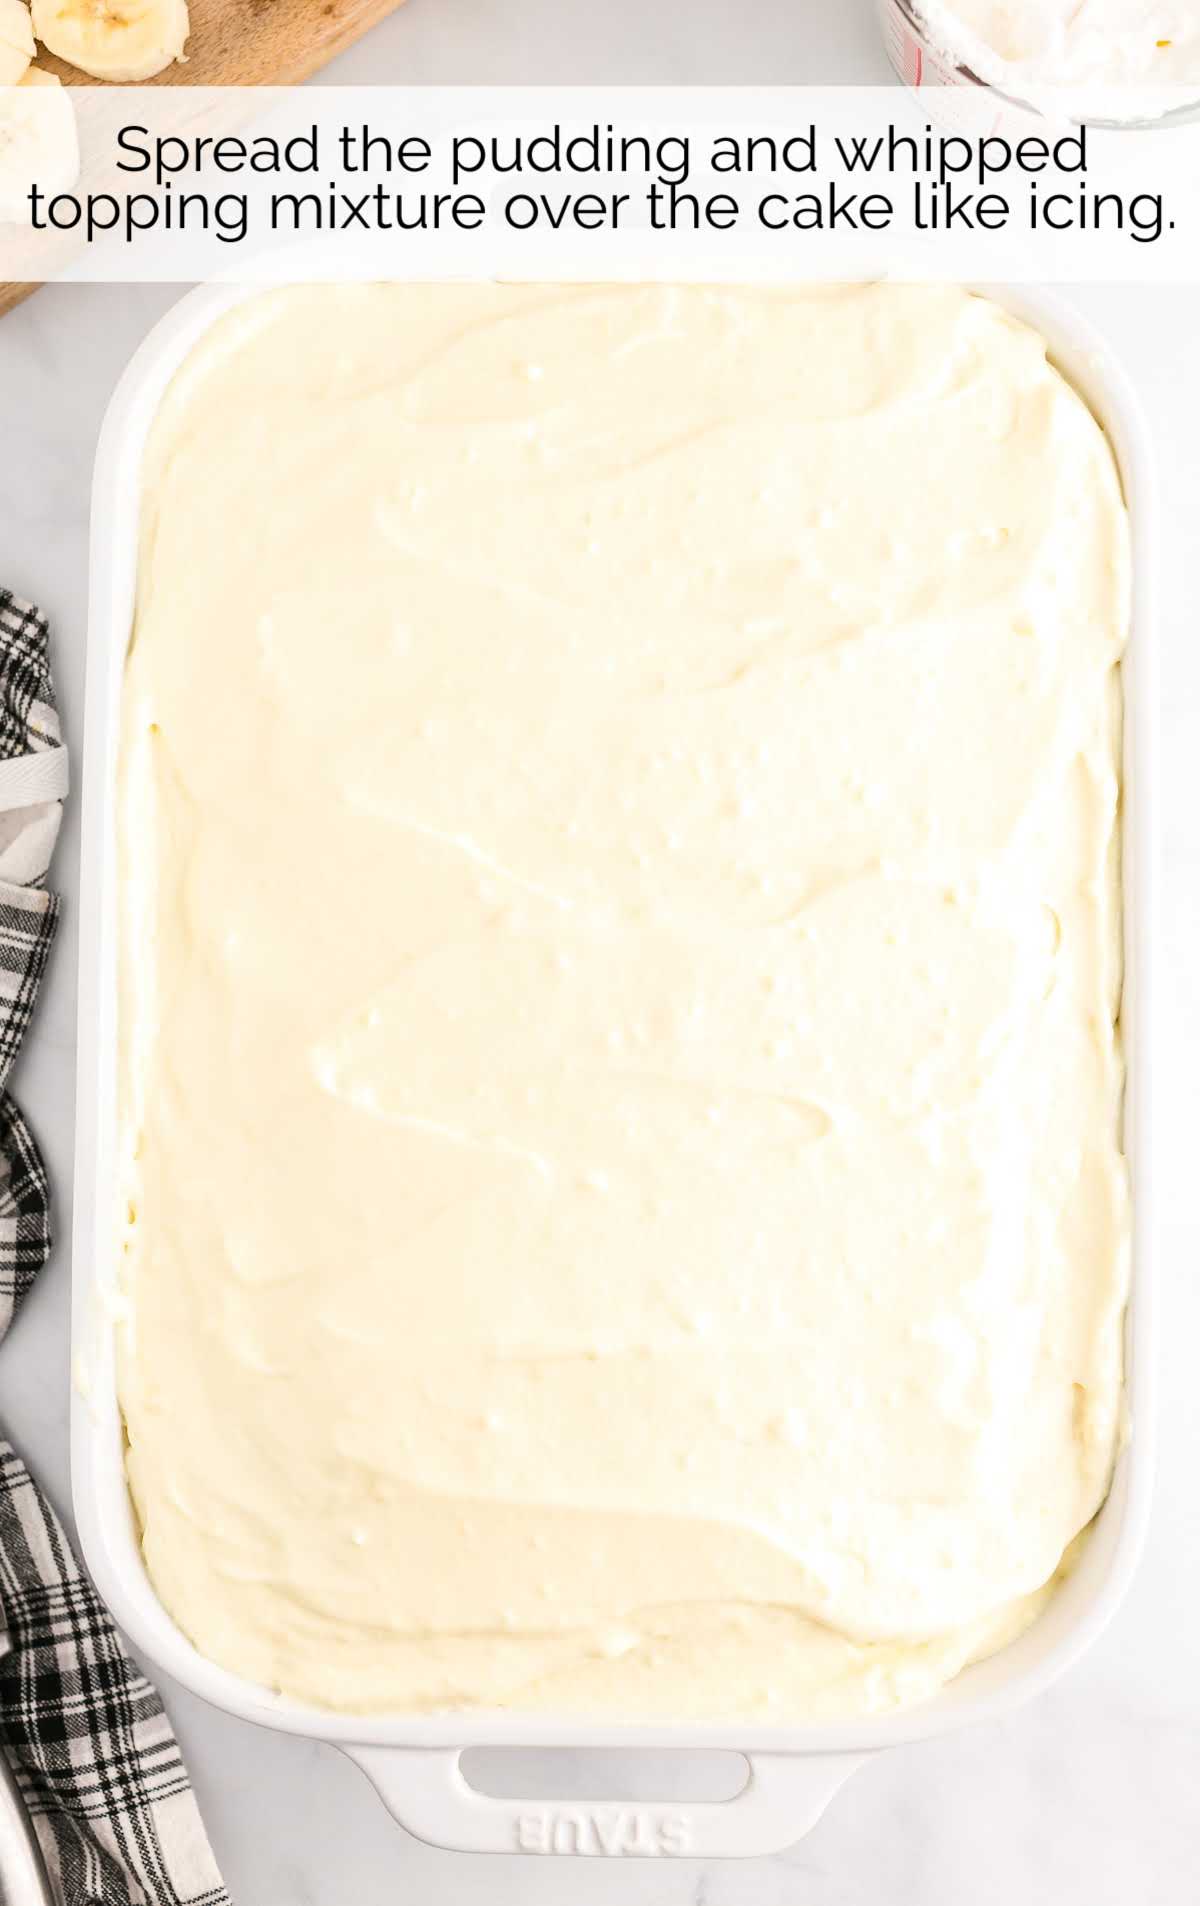 pudding and whipped topping mixture spread over the cake in a baking dish